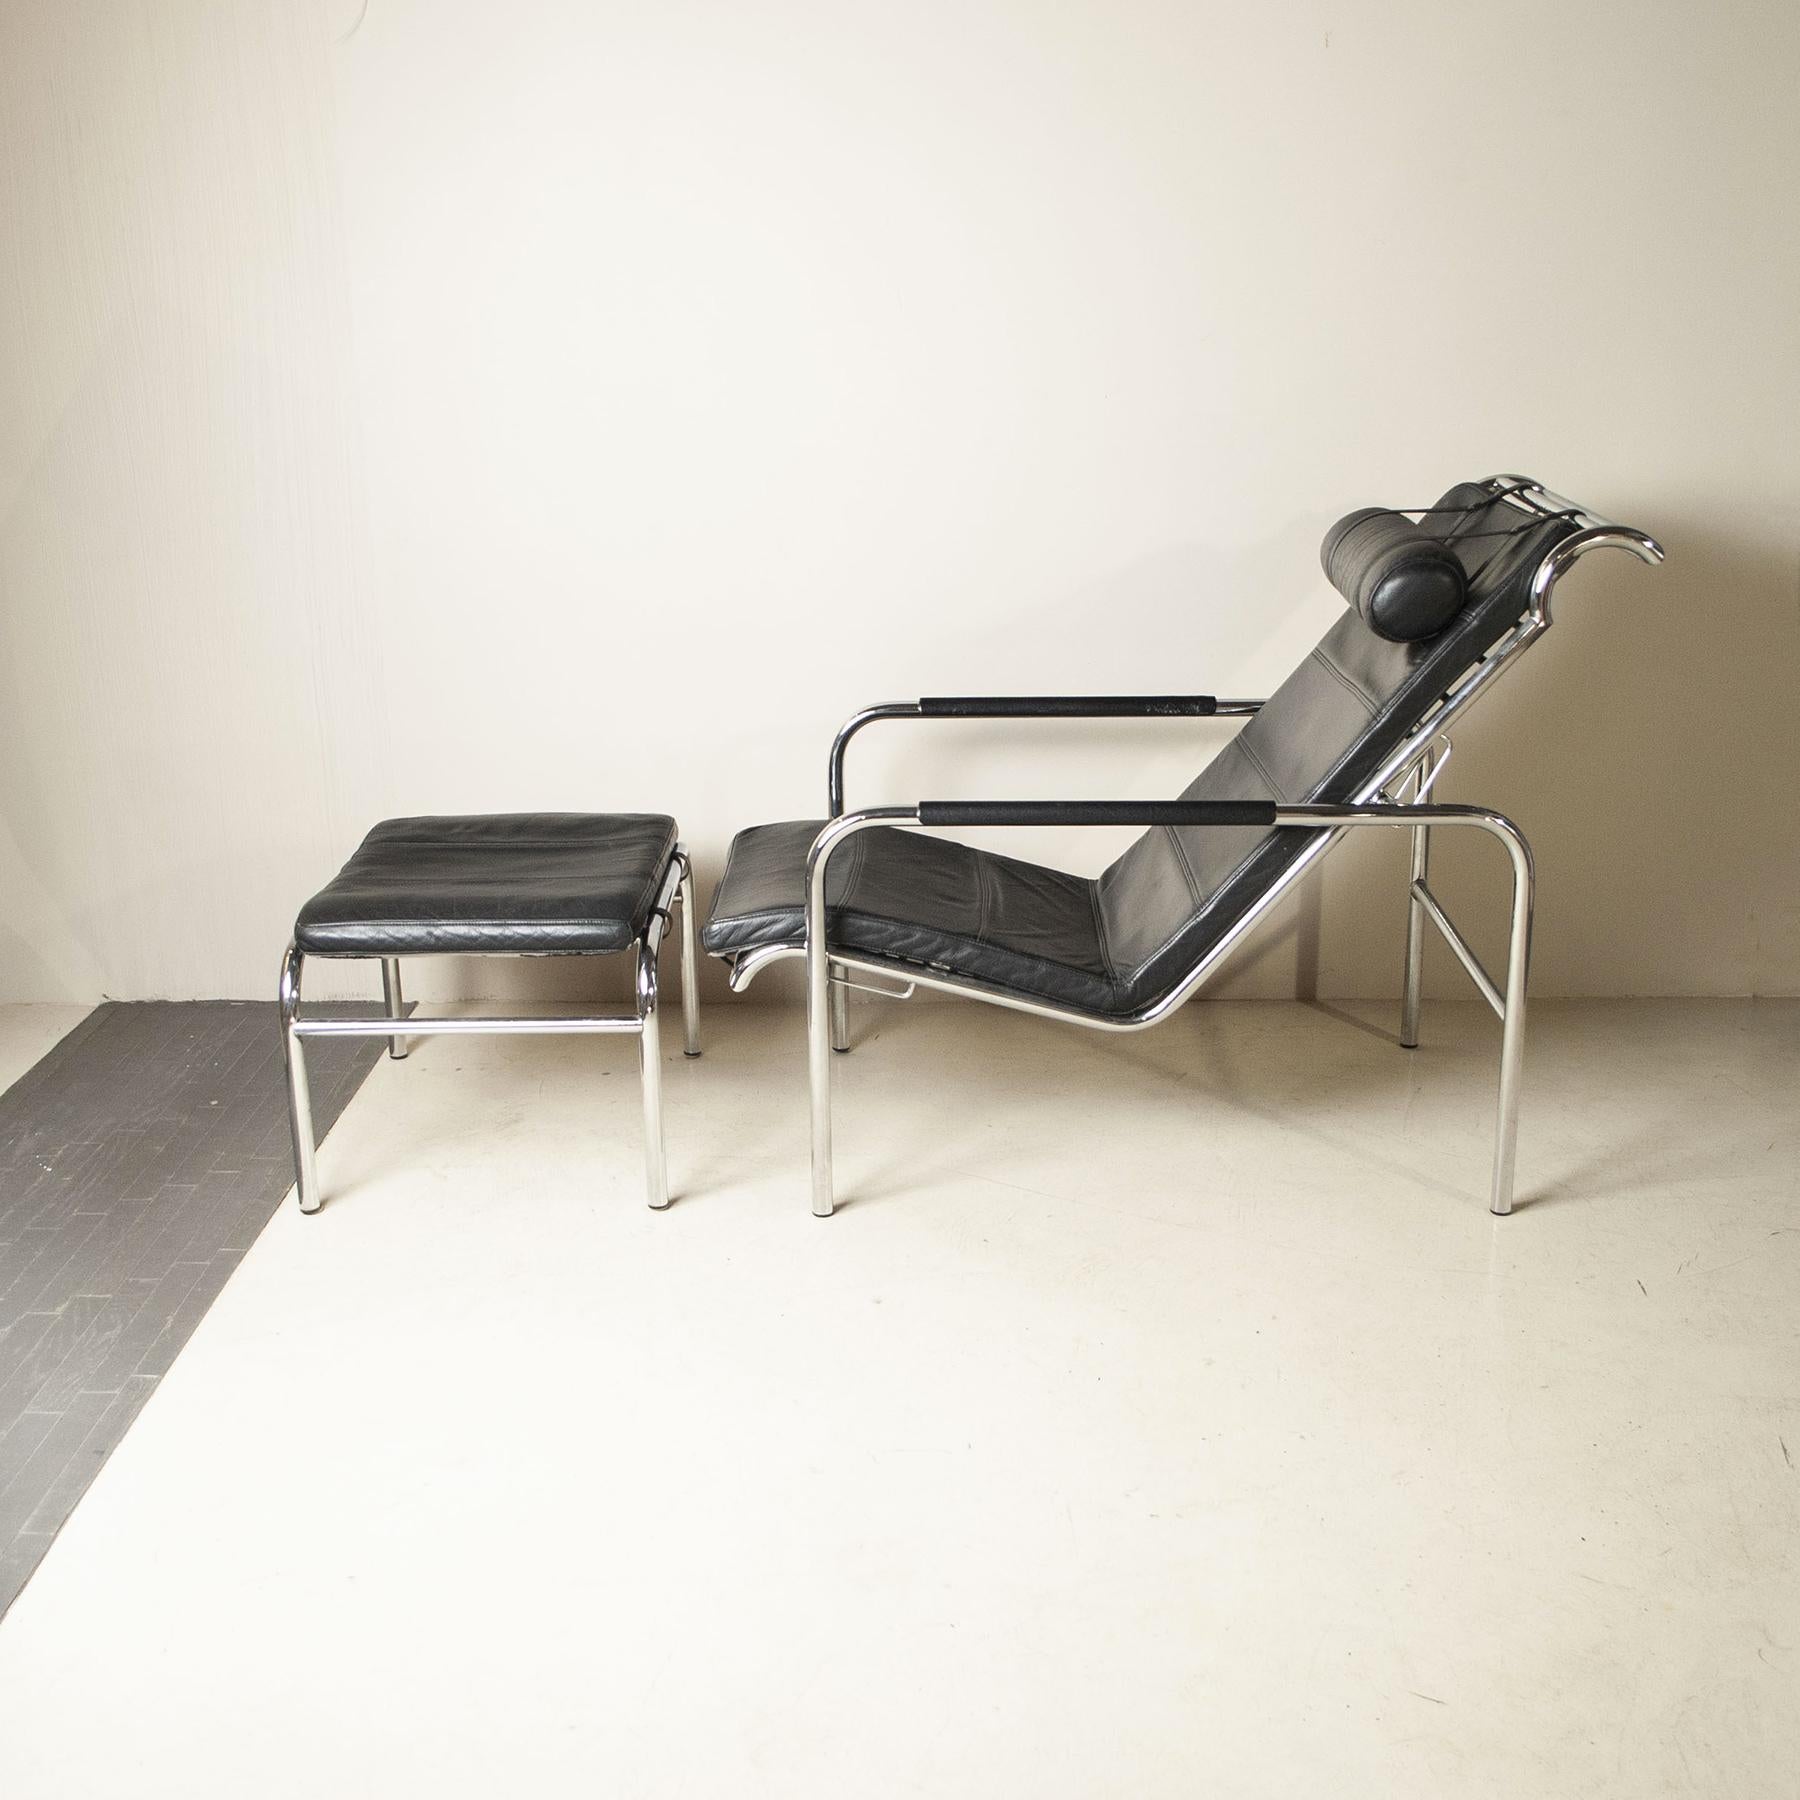 Late 20th Century Chaise Longue Genni for Zanotto by Gabriele Mucchi 70s For Sale